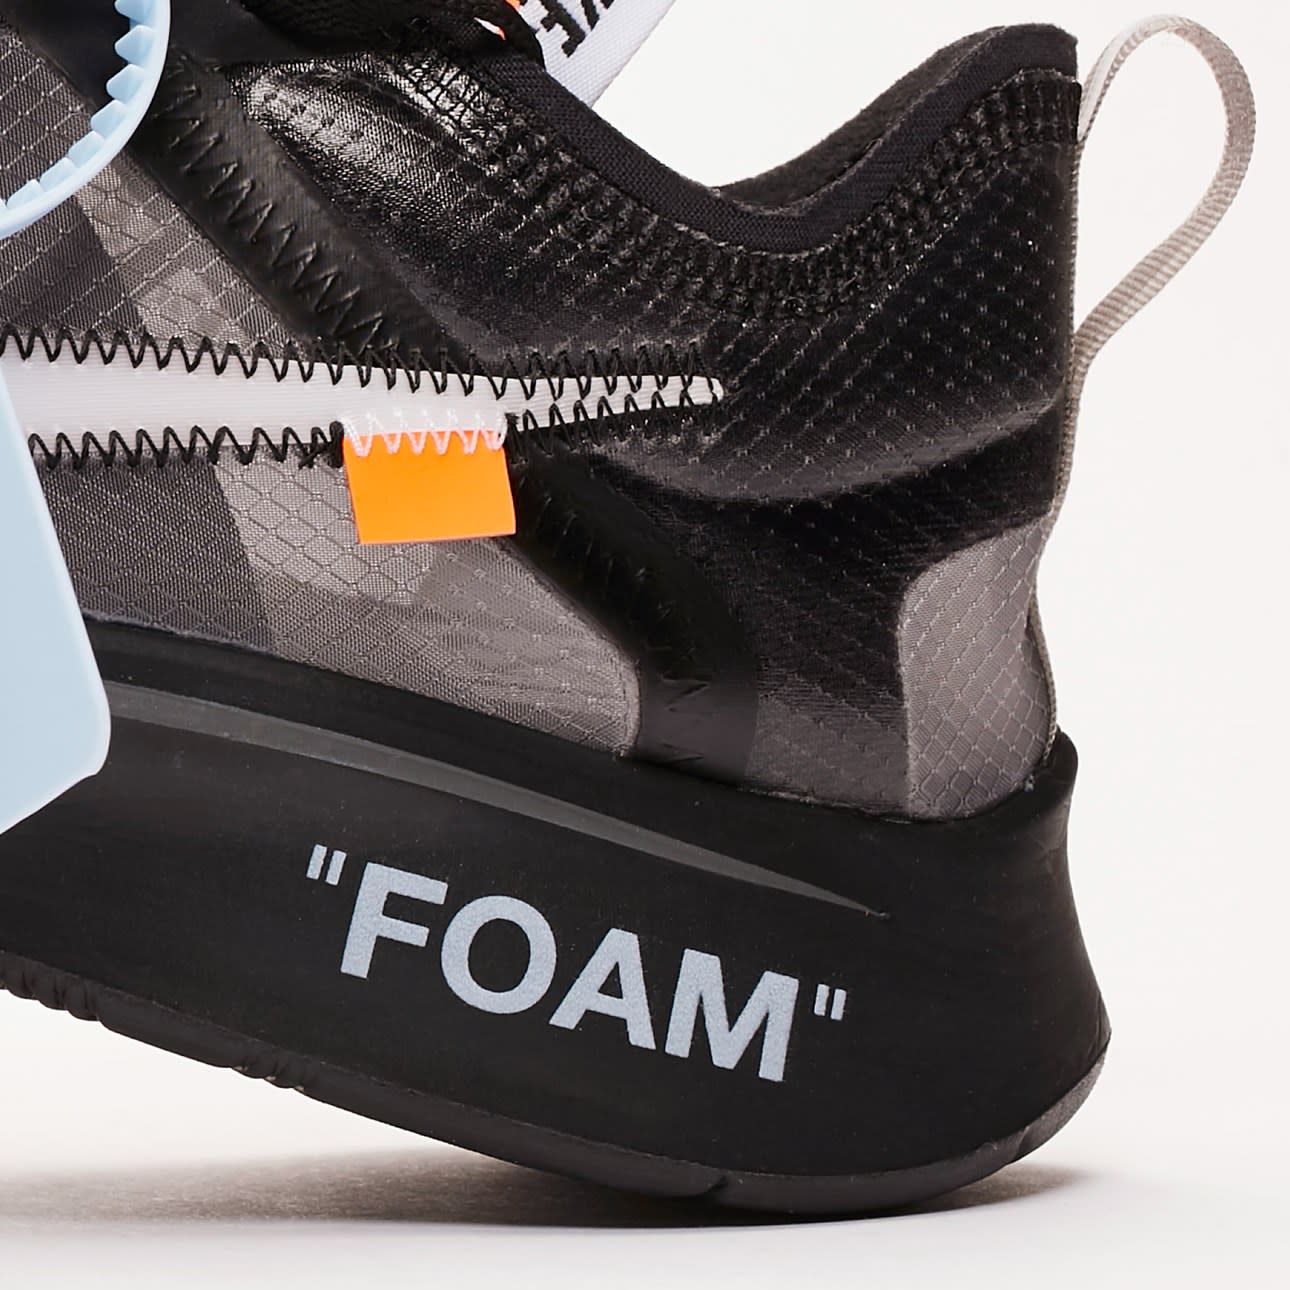 A New Black Colourway of the Off-White™ x Nike Air Force 1 Appears Online –  PAUSE Online